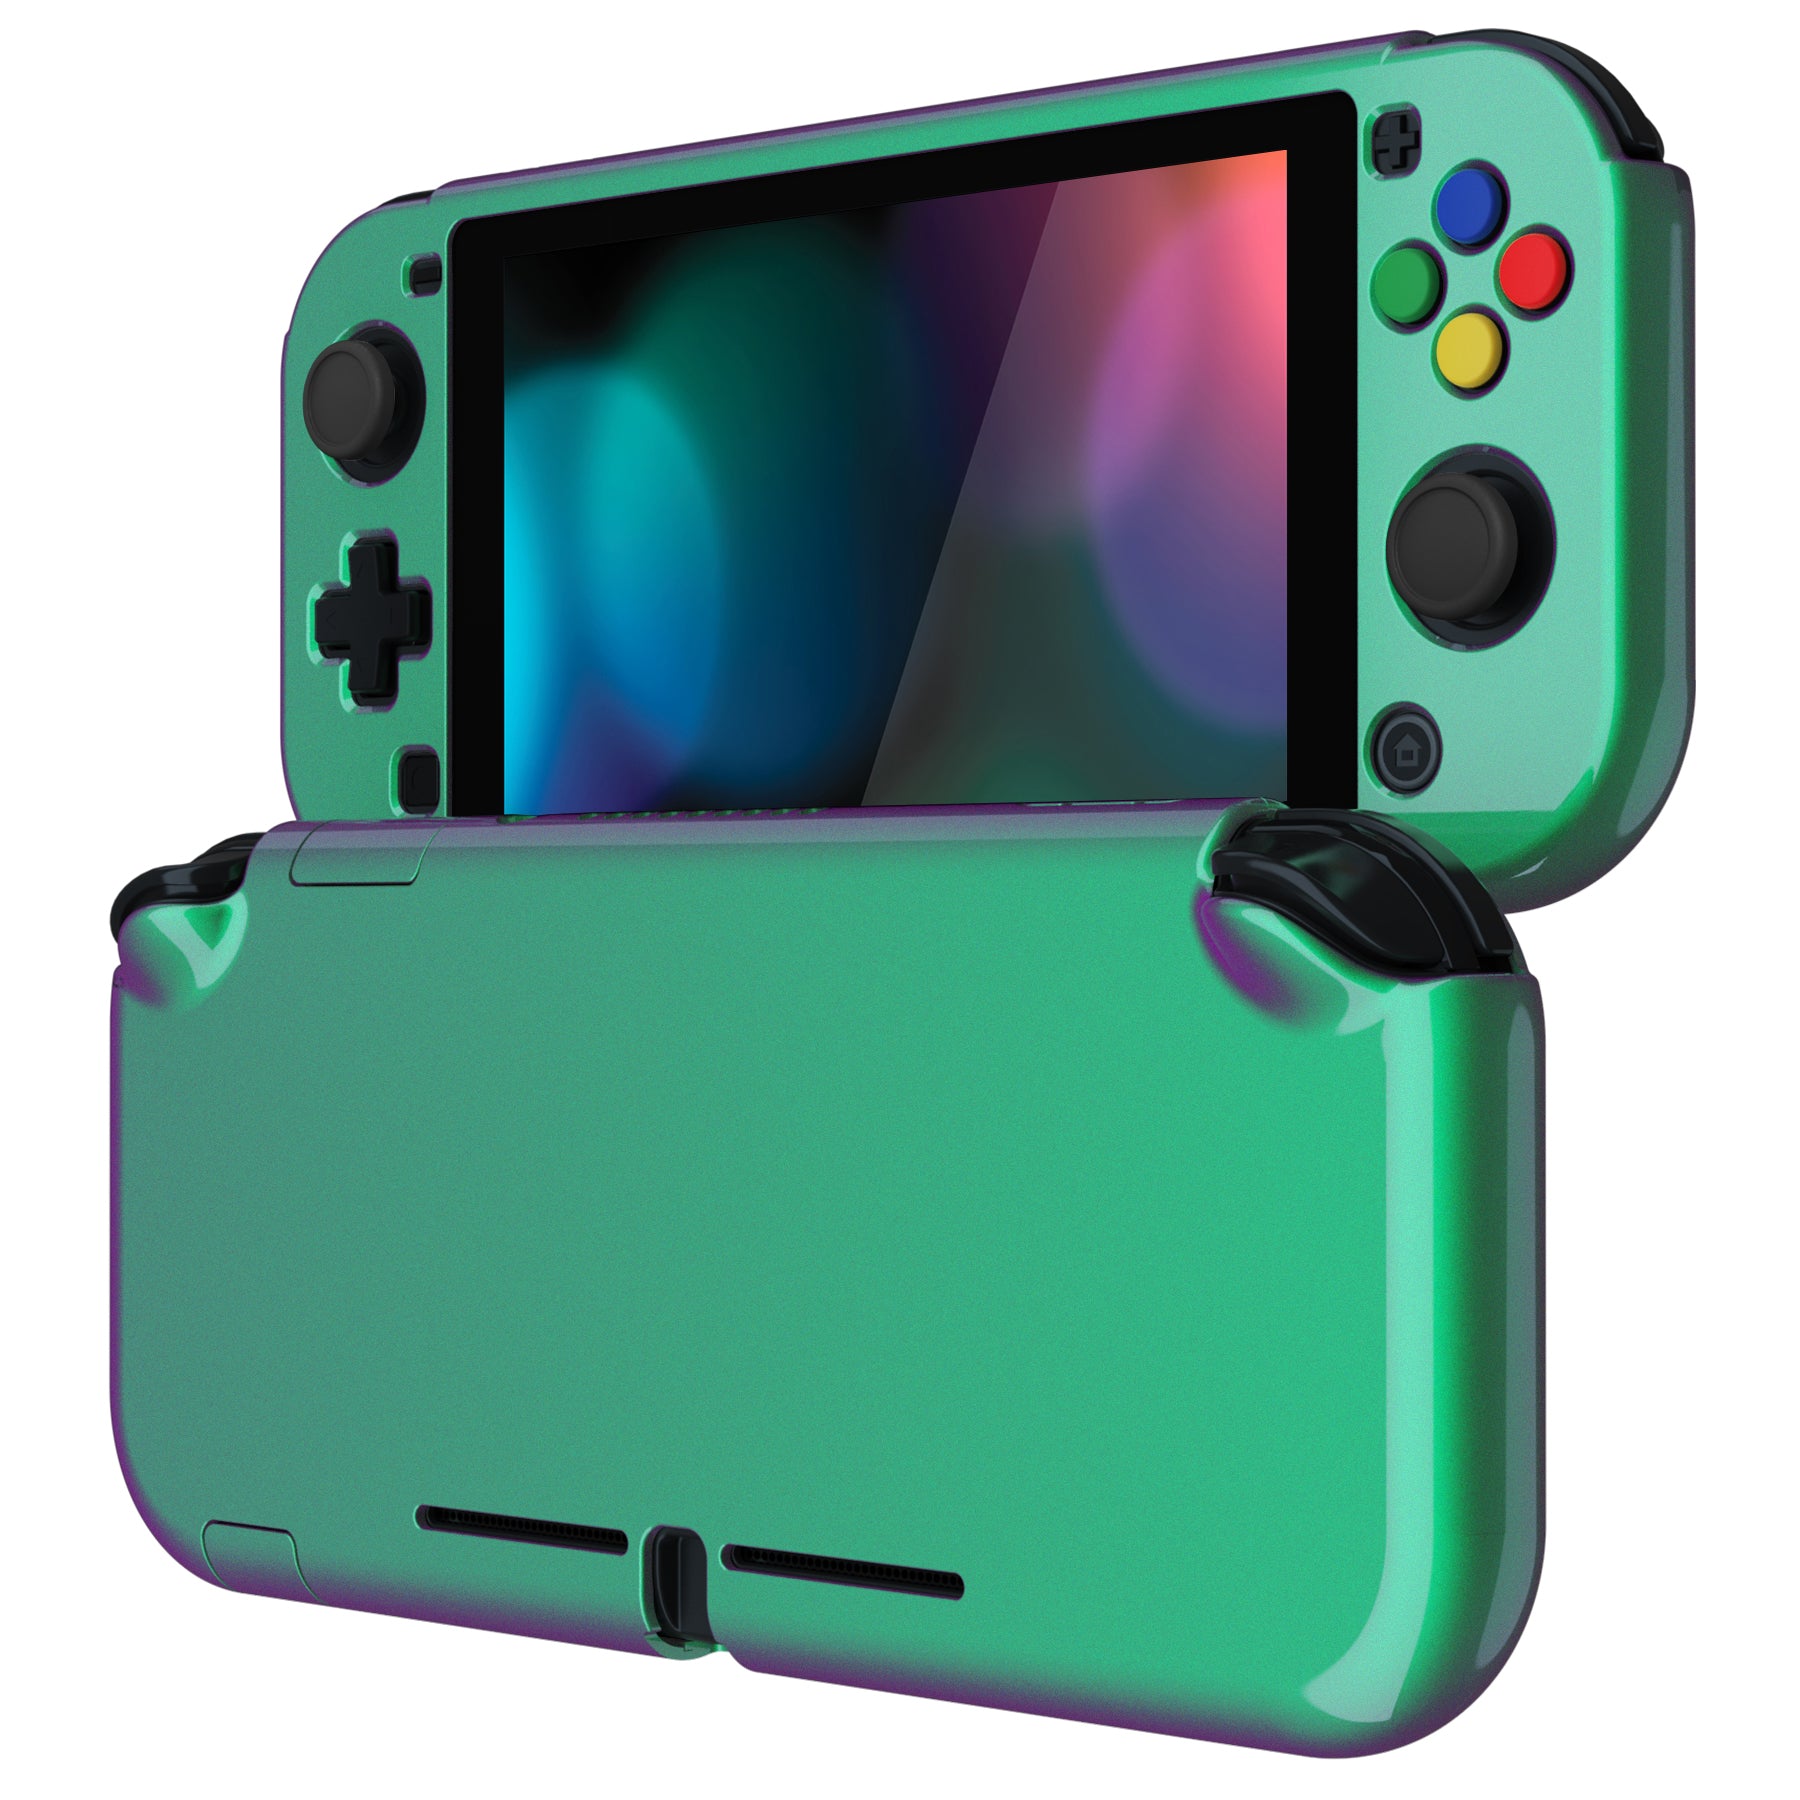  Grip for Nintendo Switch Lite, Comfortable and Ergonomic Switch  Lite Grip - Accessories for Nintendo Switch Lite (Coral) : Video Games